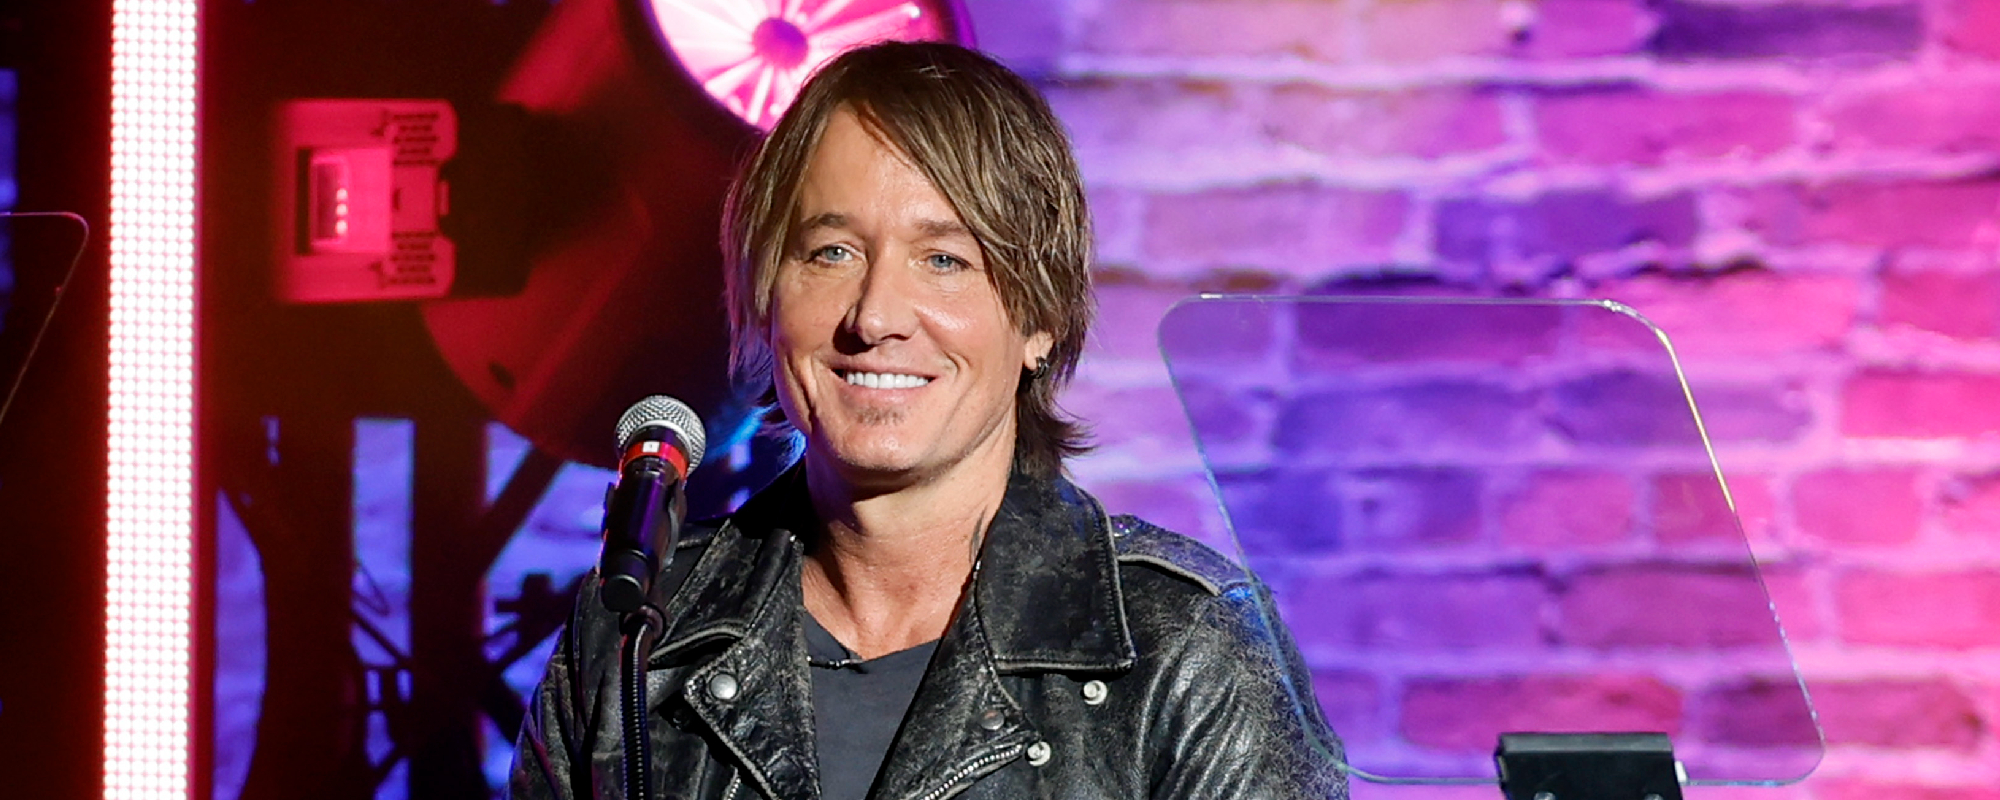 Keith Urban Shares Why Joining ‘The Voice’ Was a “No Brainer”